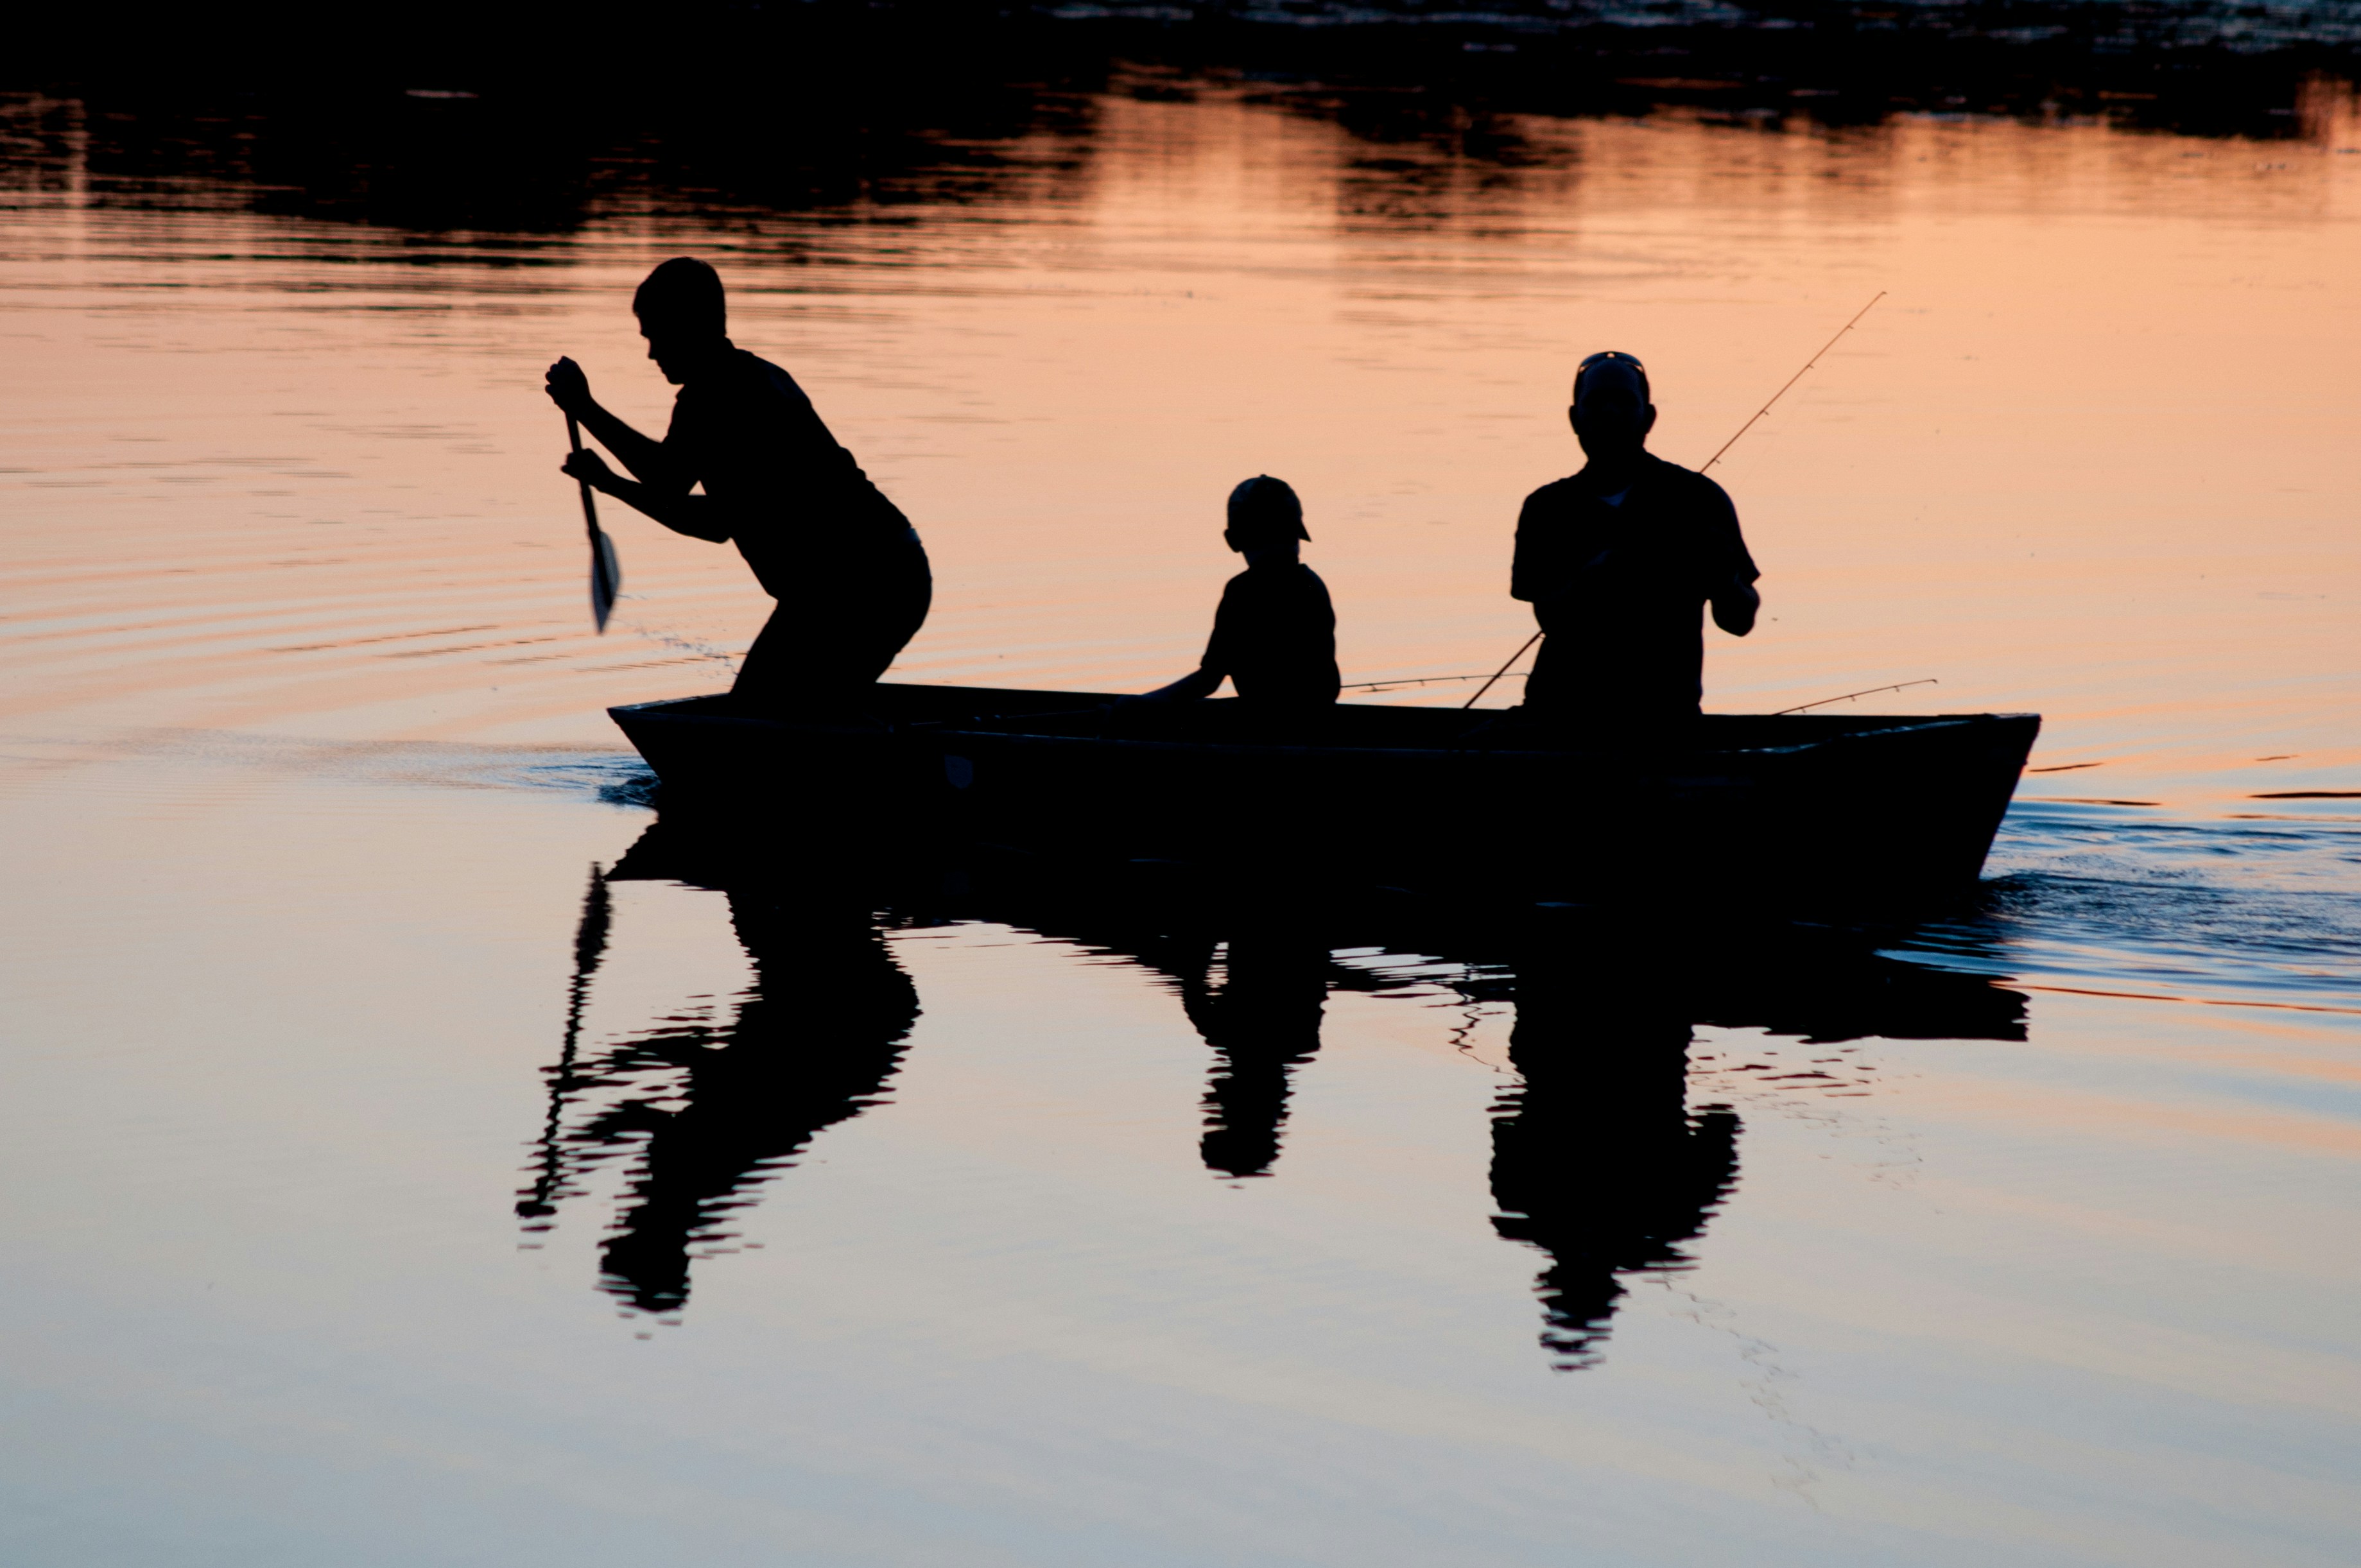 3 People in a boat on a lake at sunset fishing